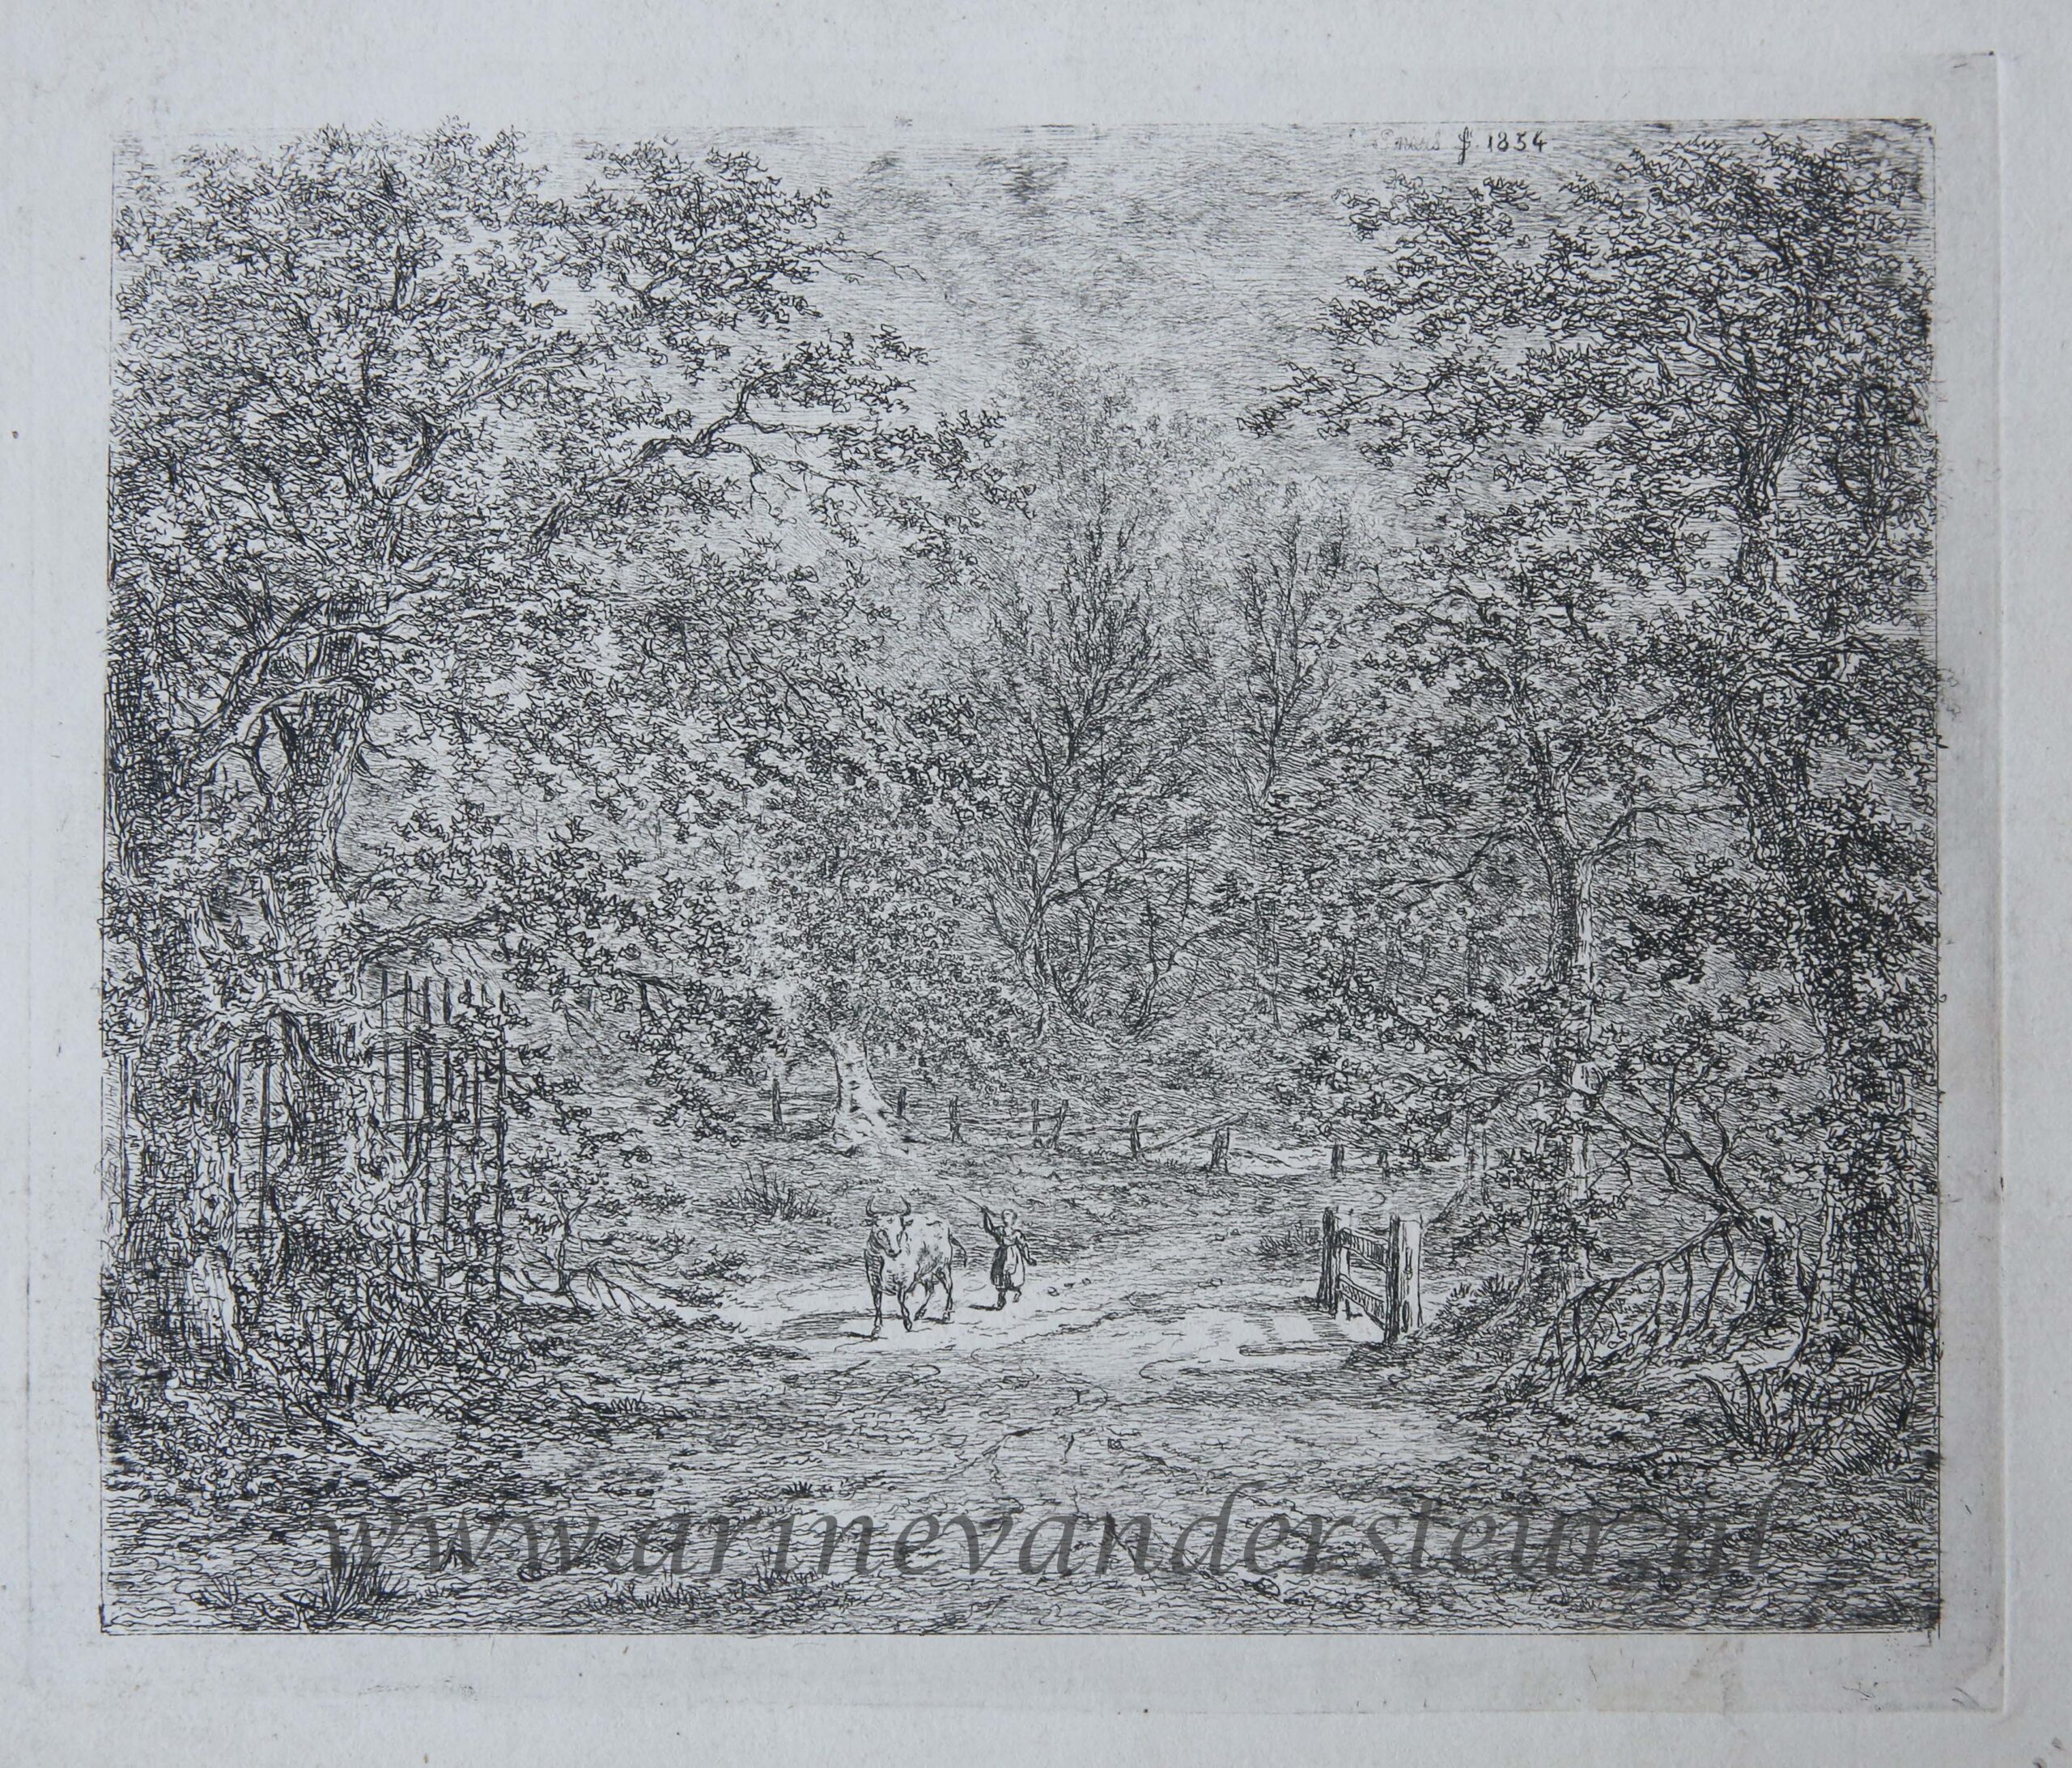 [Original etching, ets] G.E. de Micault. The cow in the Bentheim forest. (state I), published 1854.